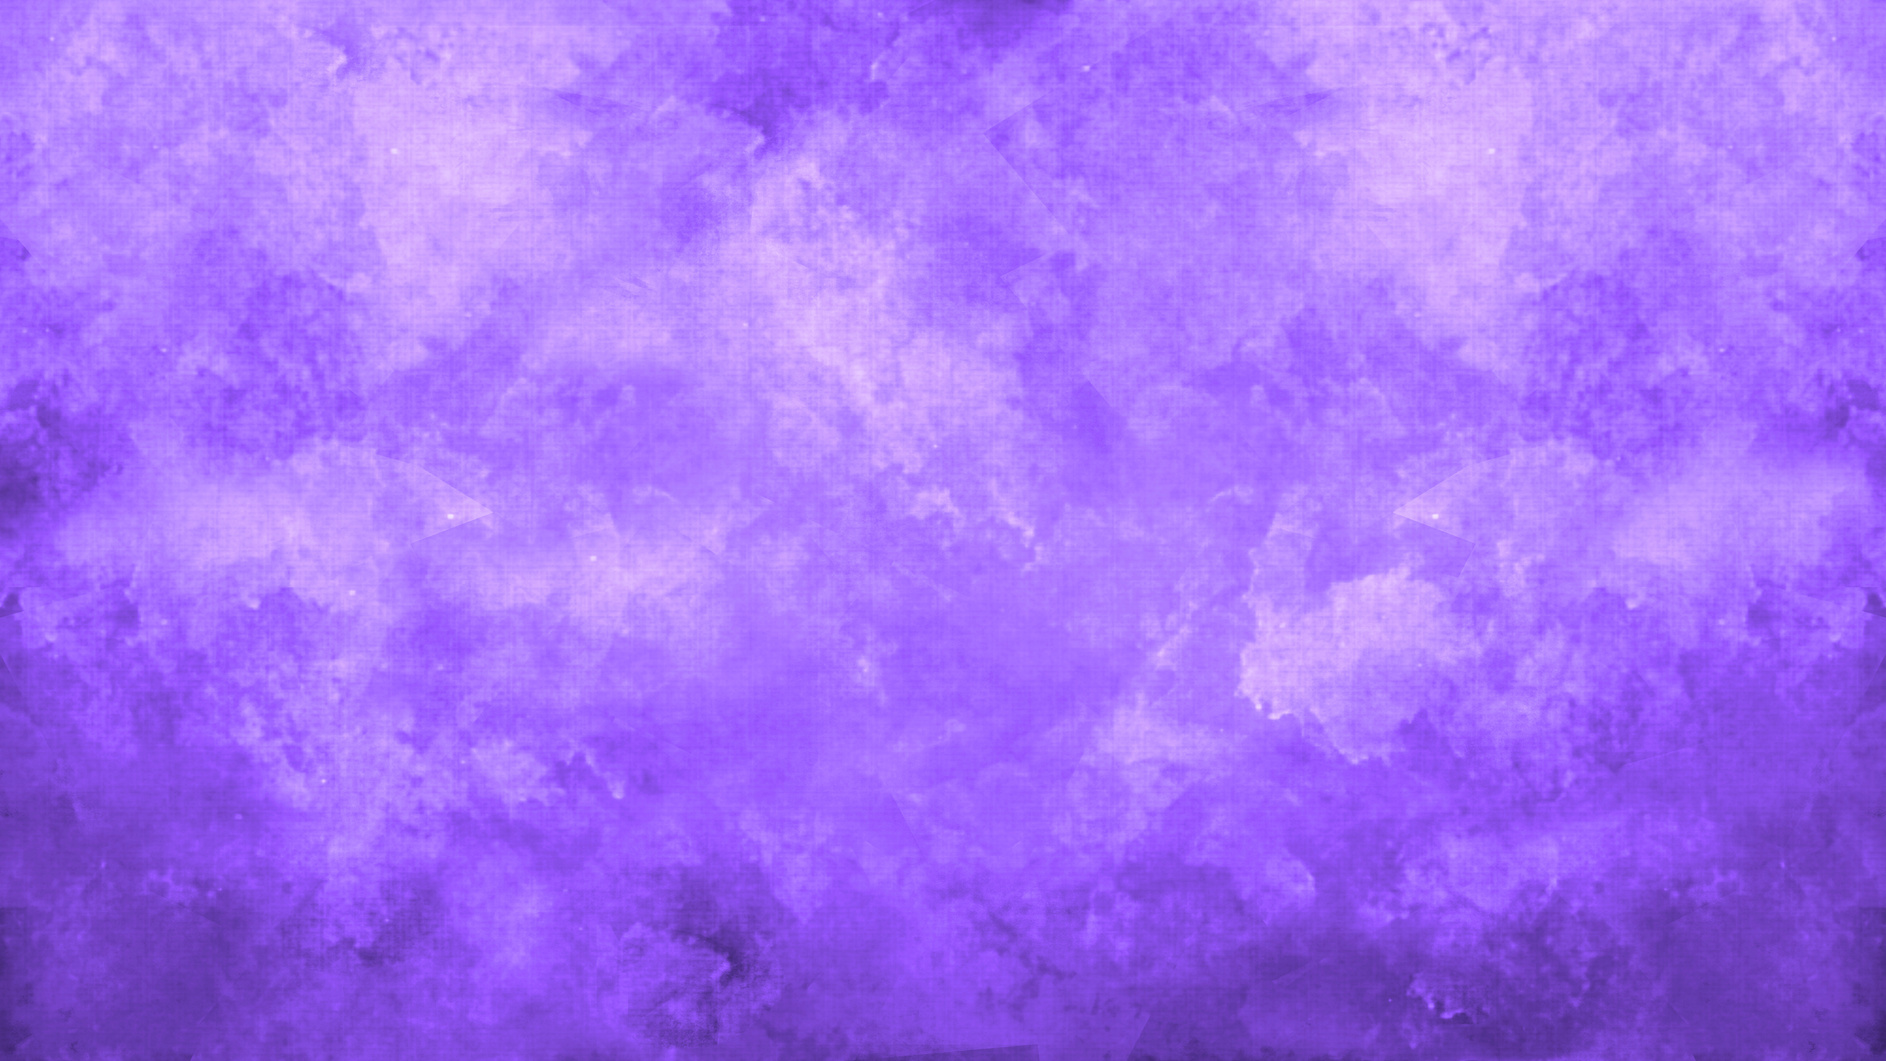 Watercolor Brush Strokes - Lavender Purple Violet Abstract Painting Background